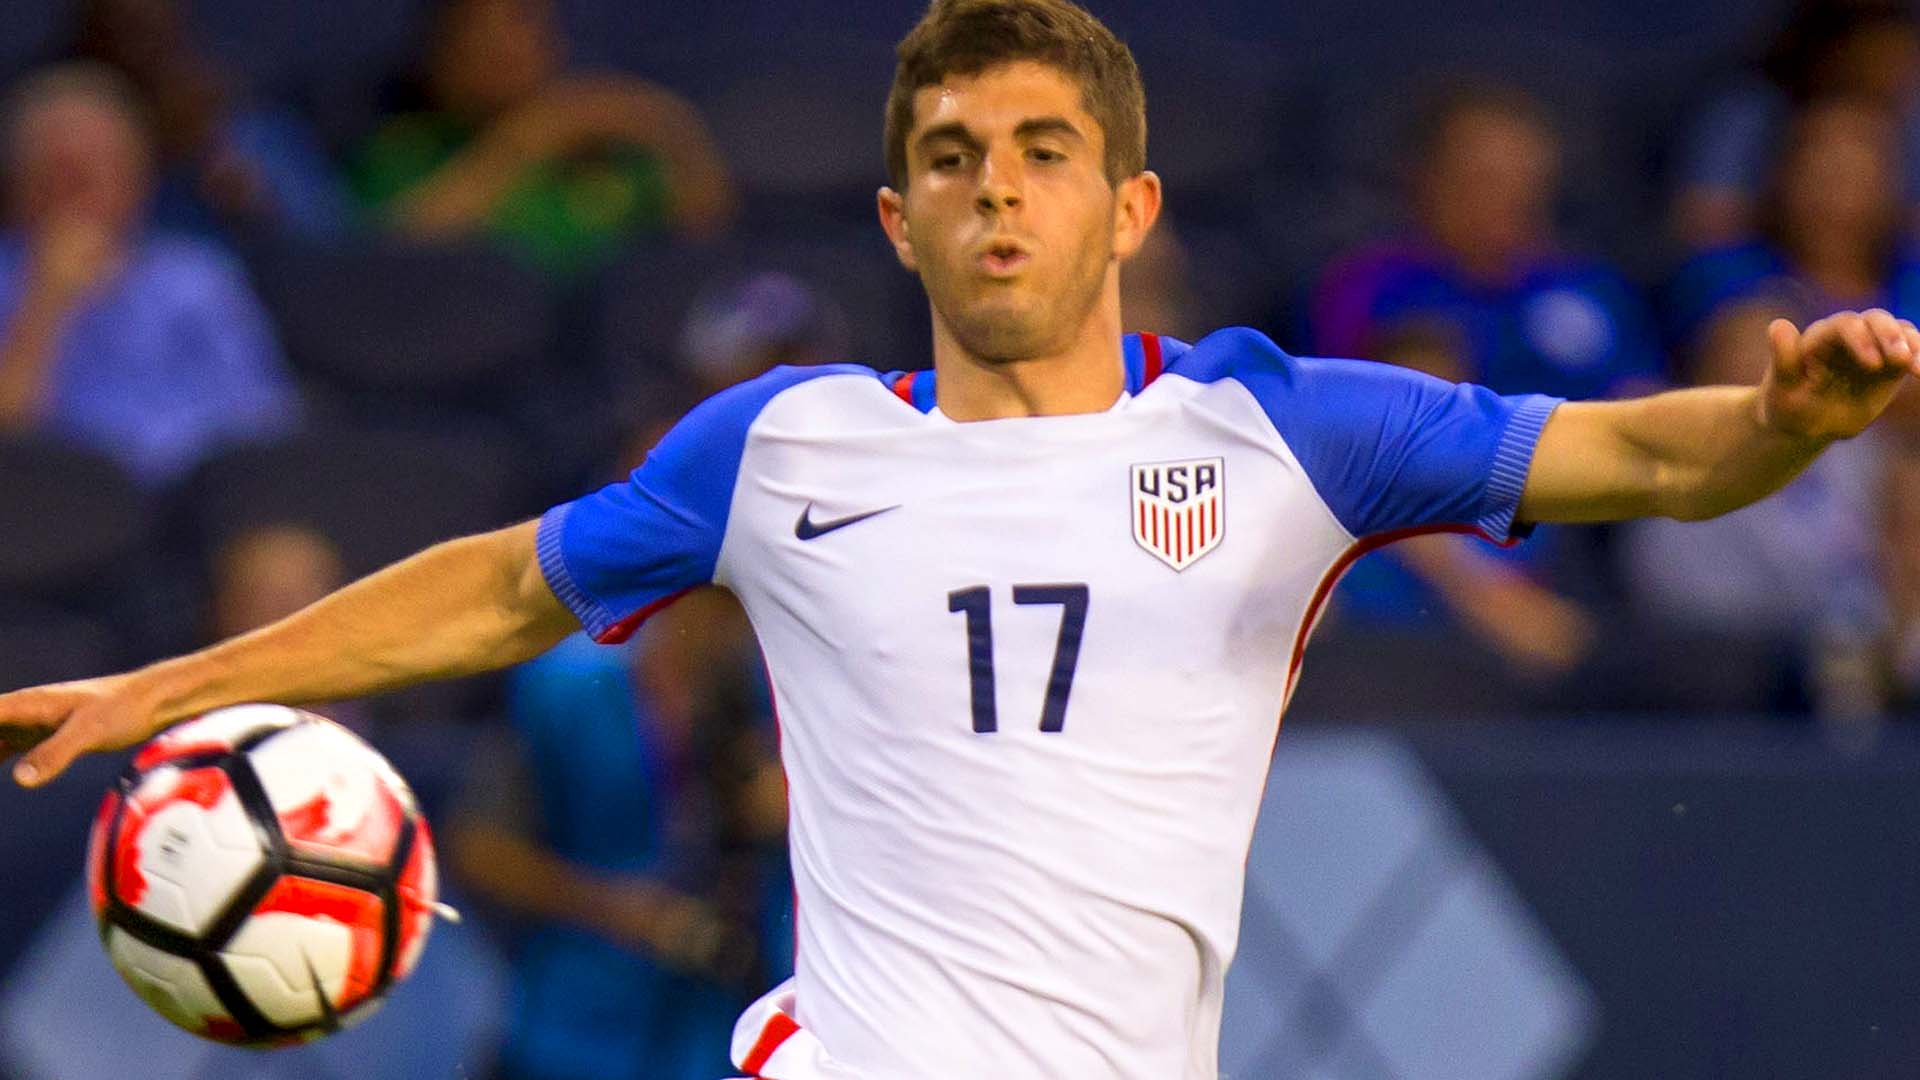 Rising U.S. soccer star Christian Pulisic youngest to score first